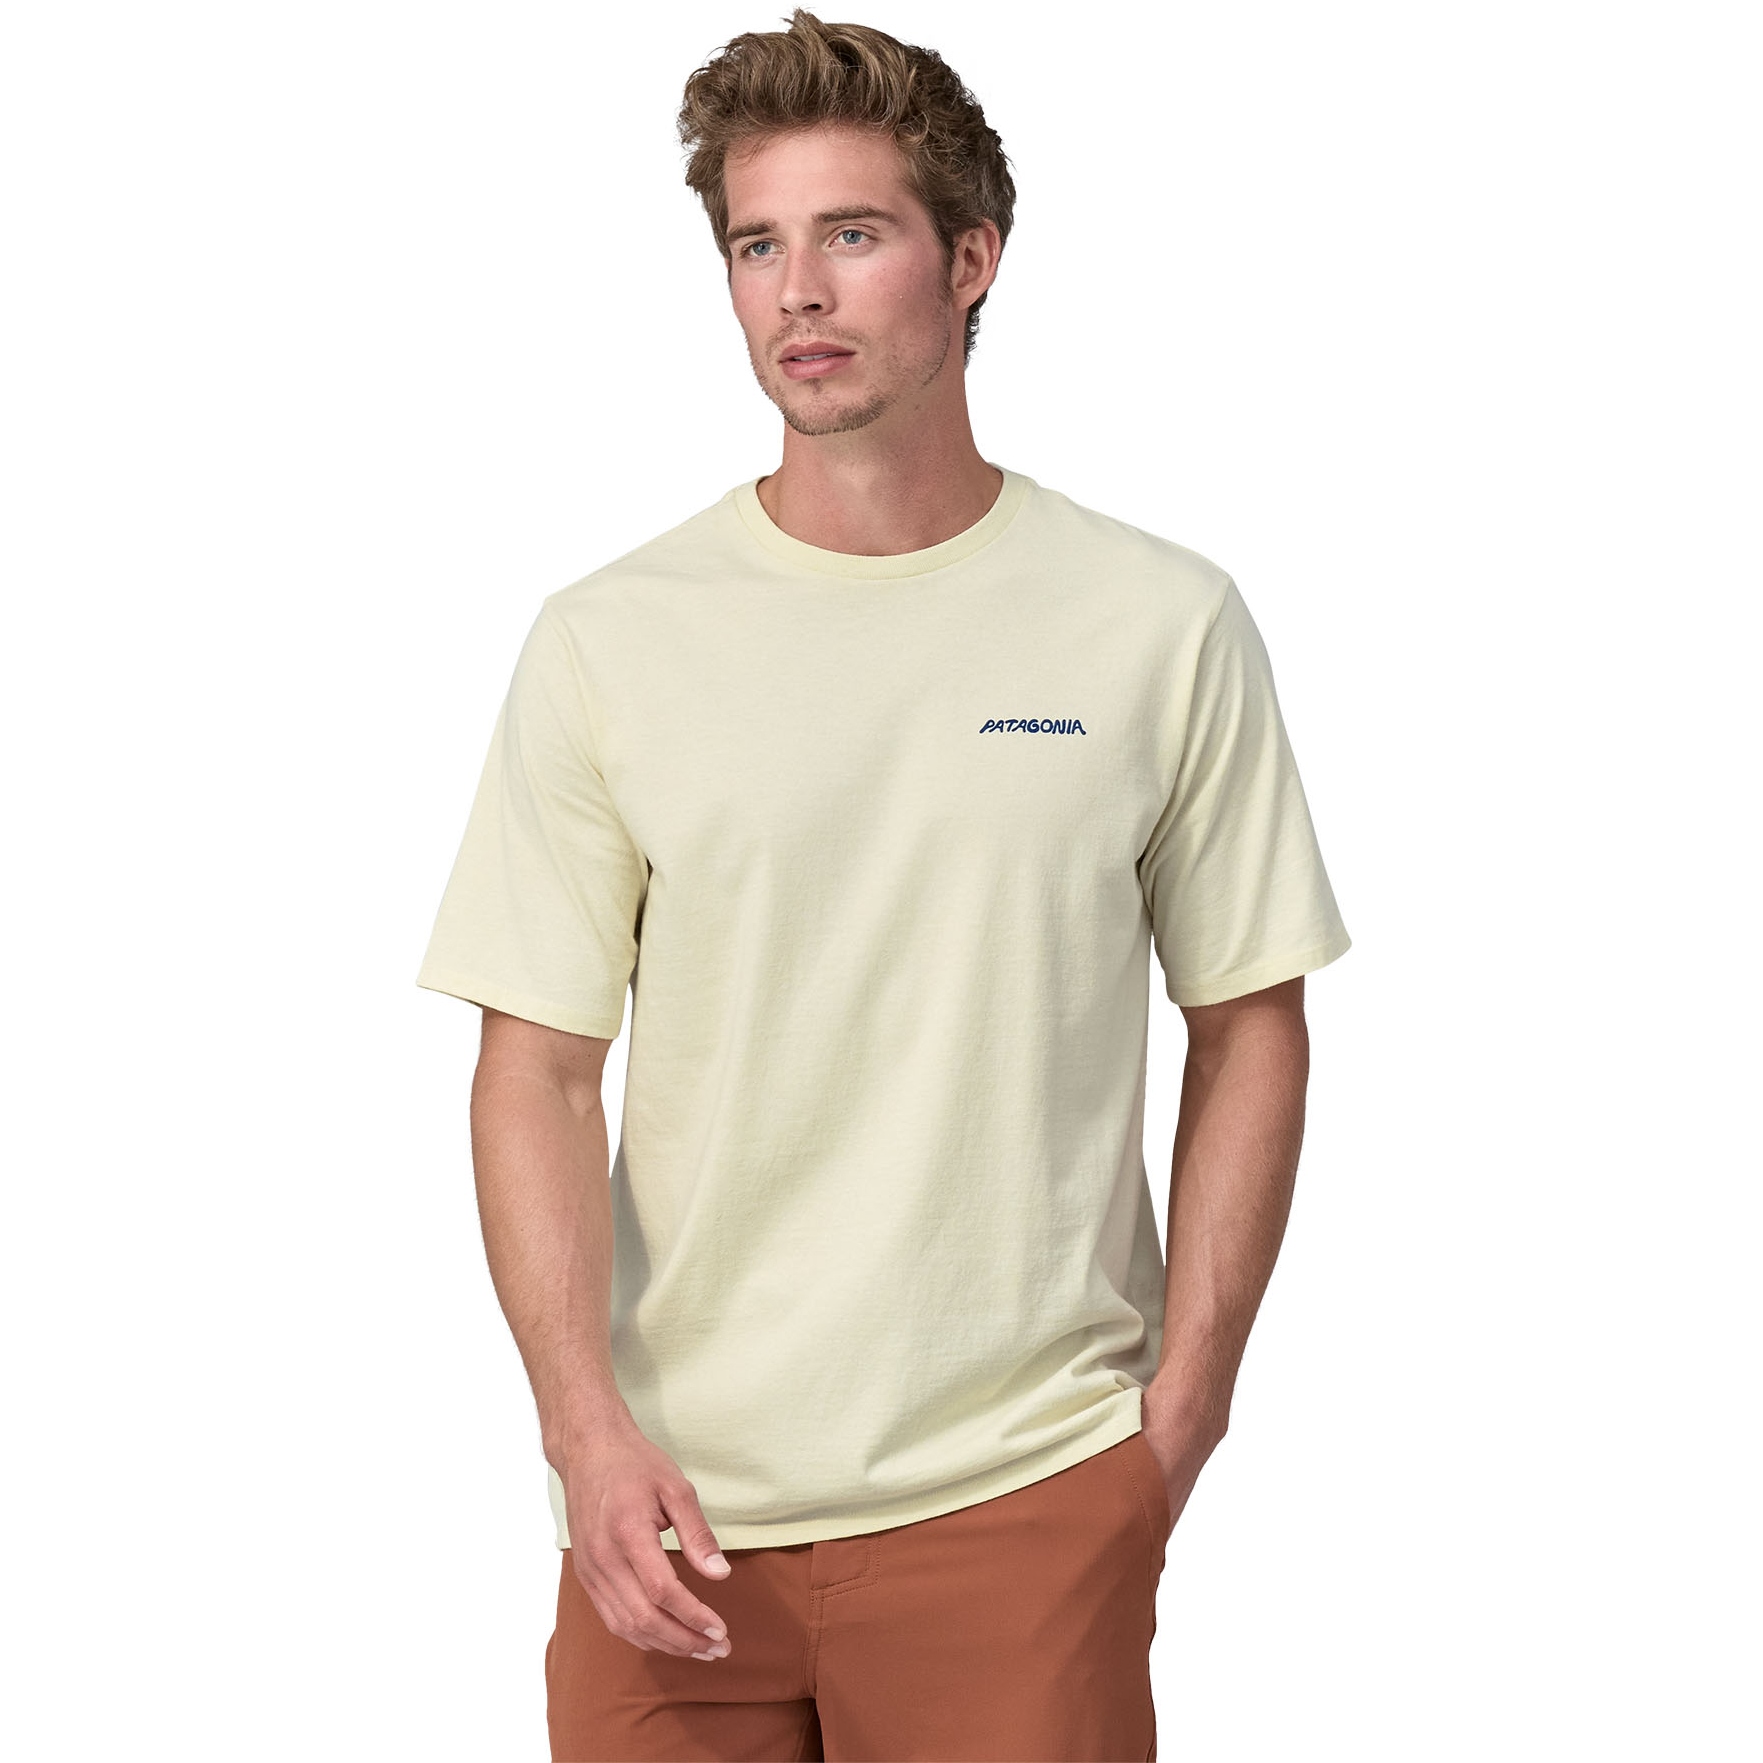 Picture of Patagonia Sunrise Rollers Responsibili-Tee Men - Birch White